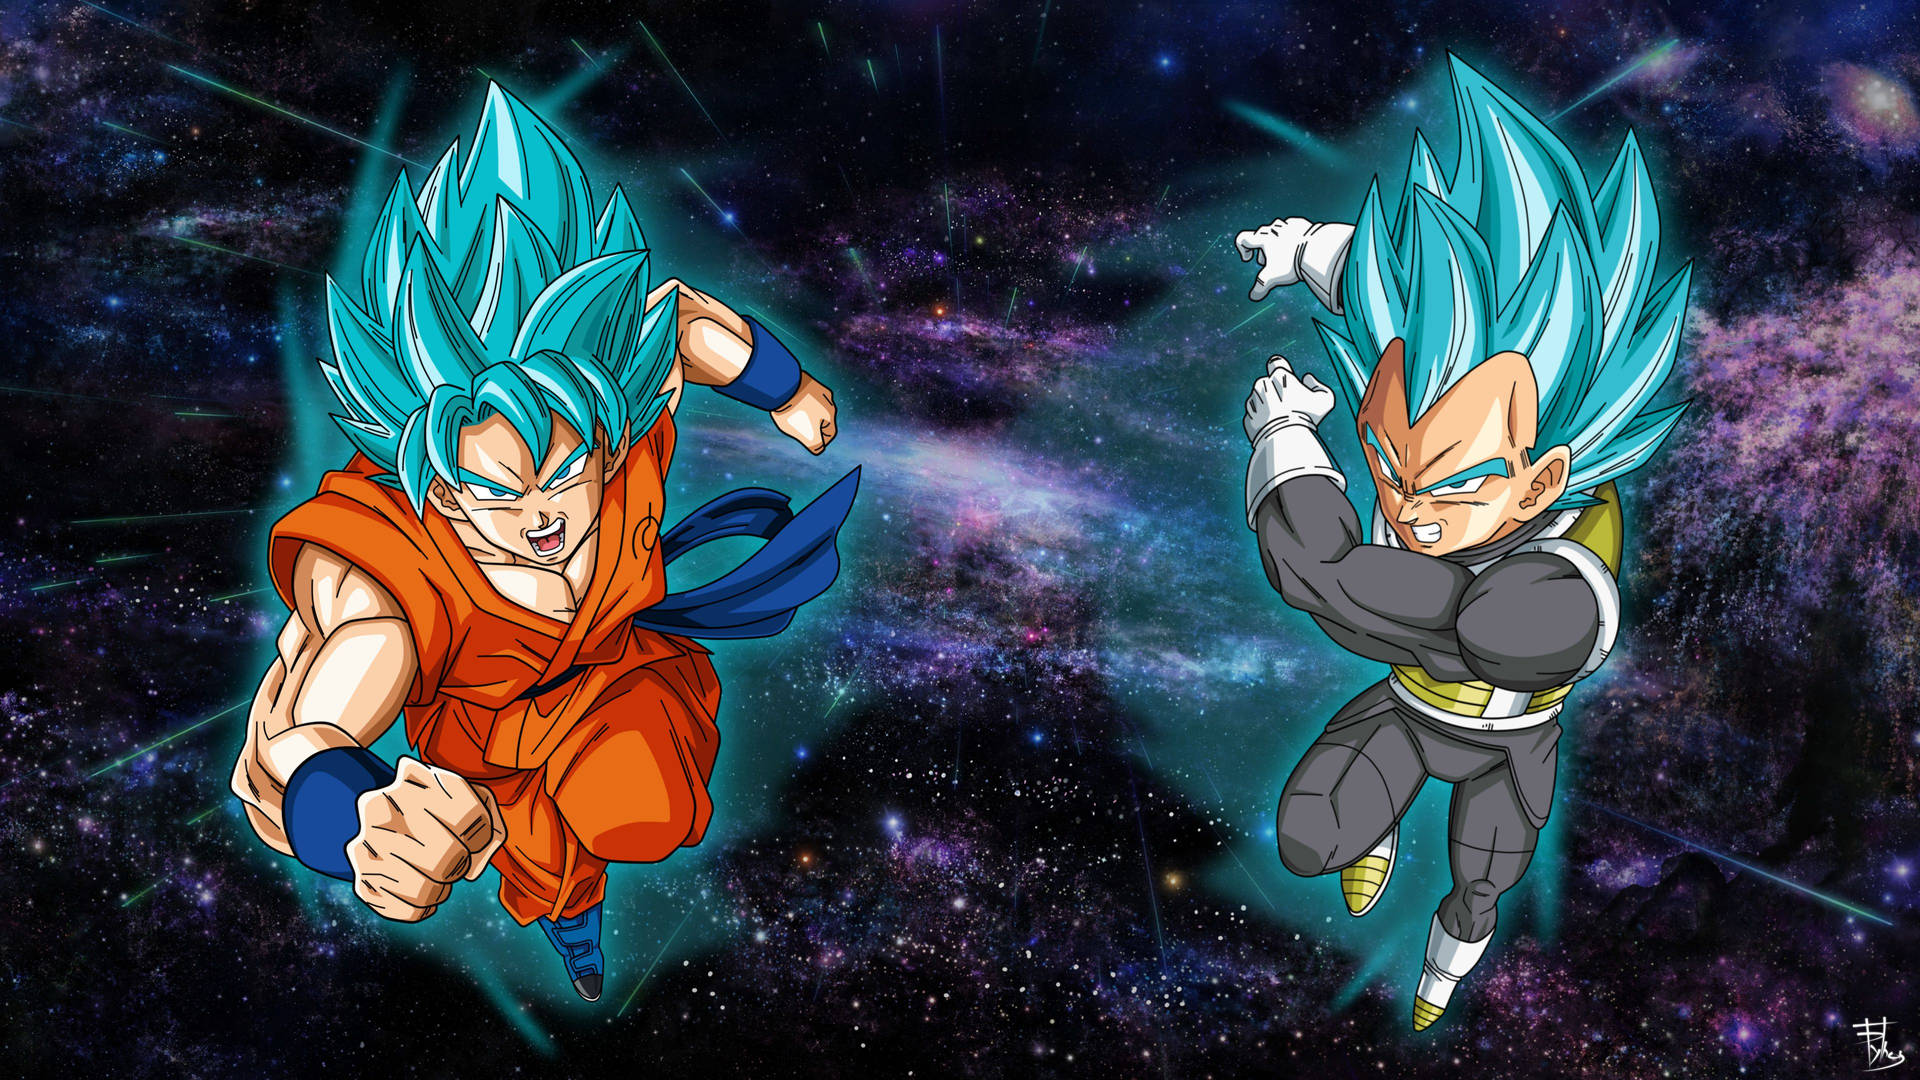 Goku and Vegeta, two of Dragon Ball Super's main heroes, come together in a display of strength and courage. Wallpaper